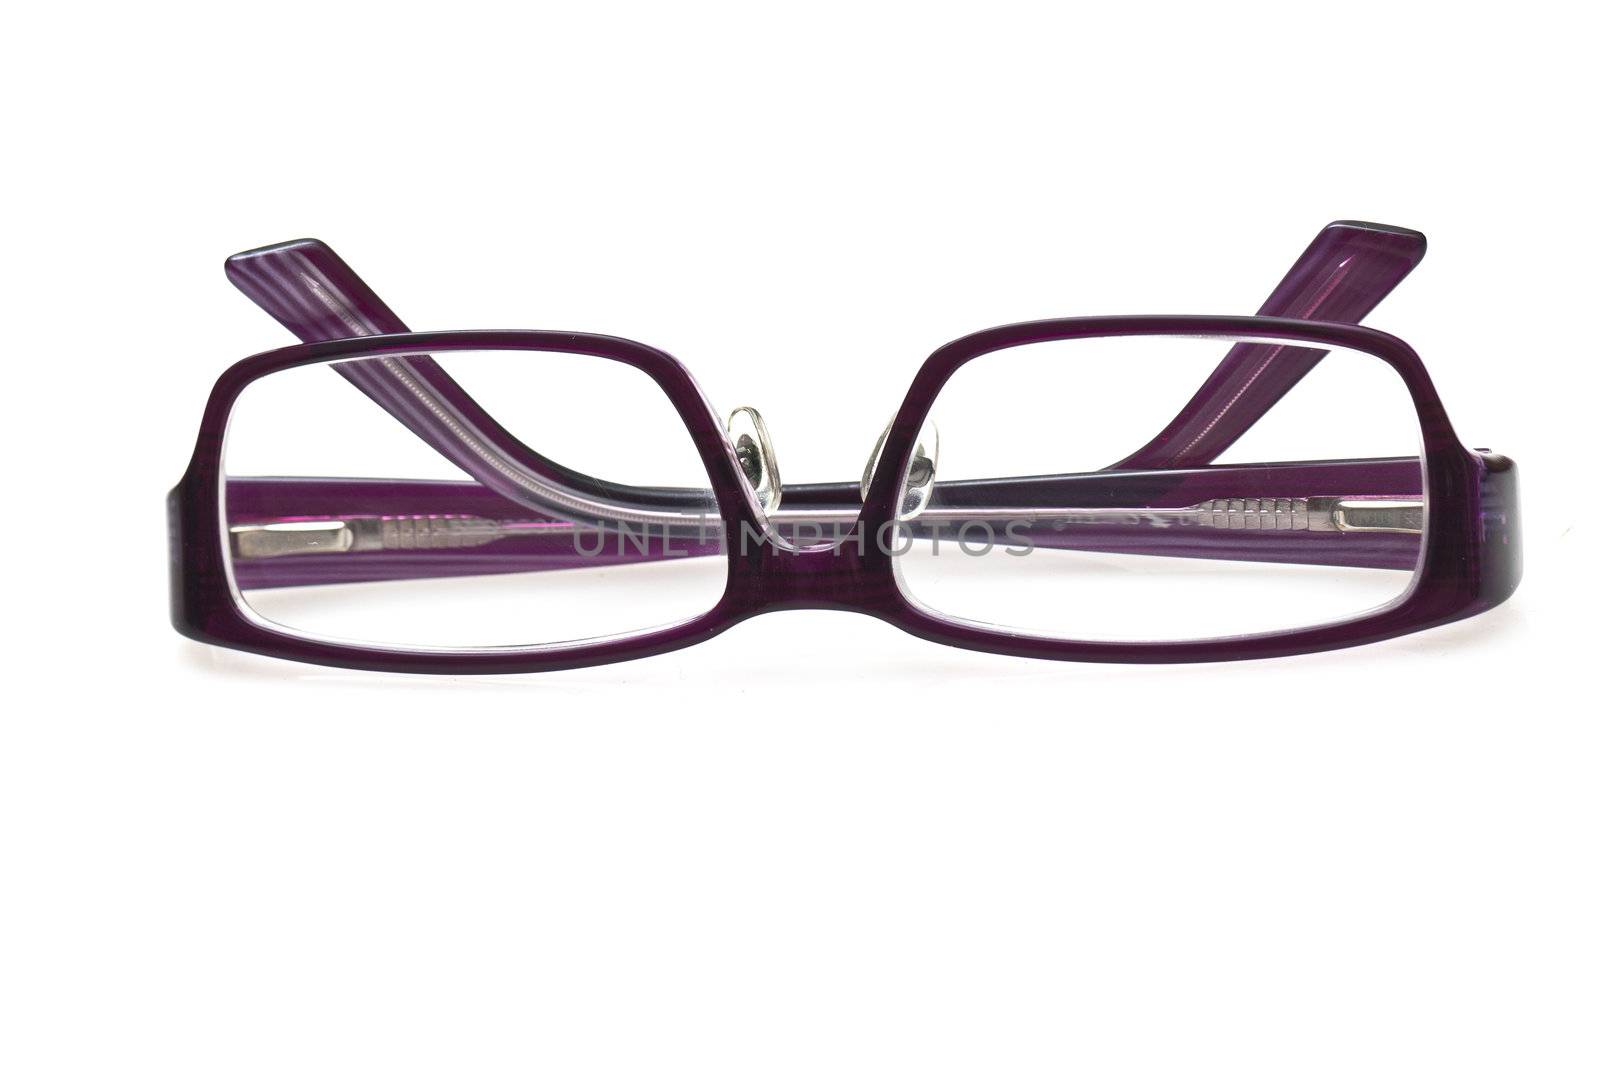 A pair of purple glasses